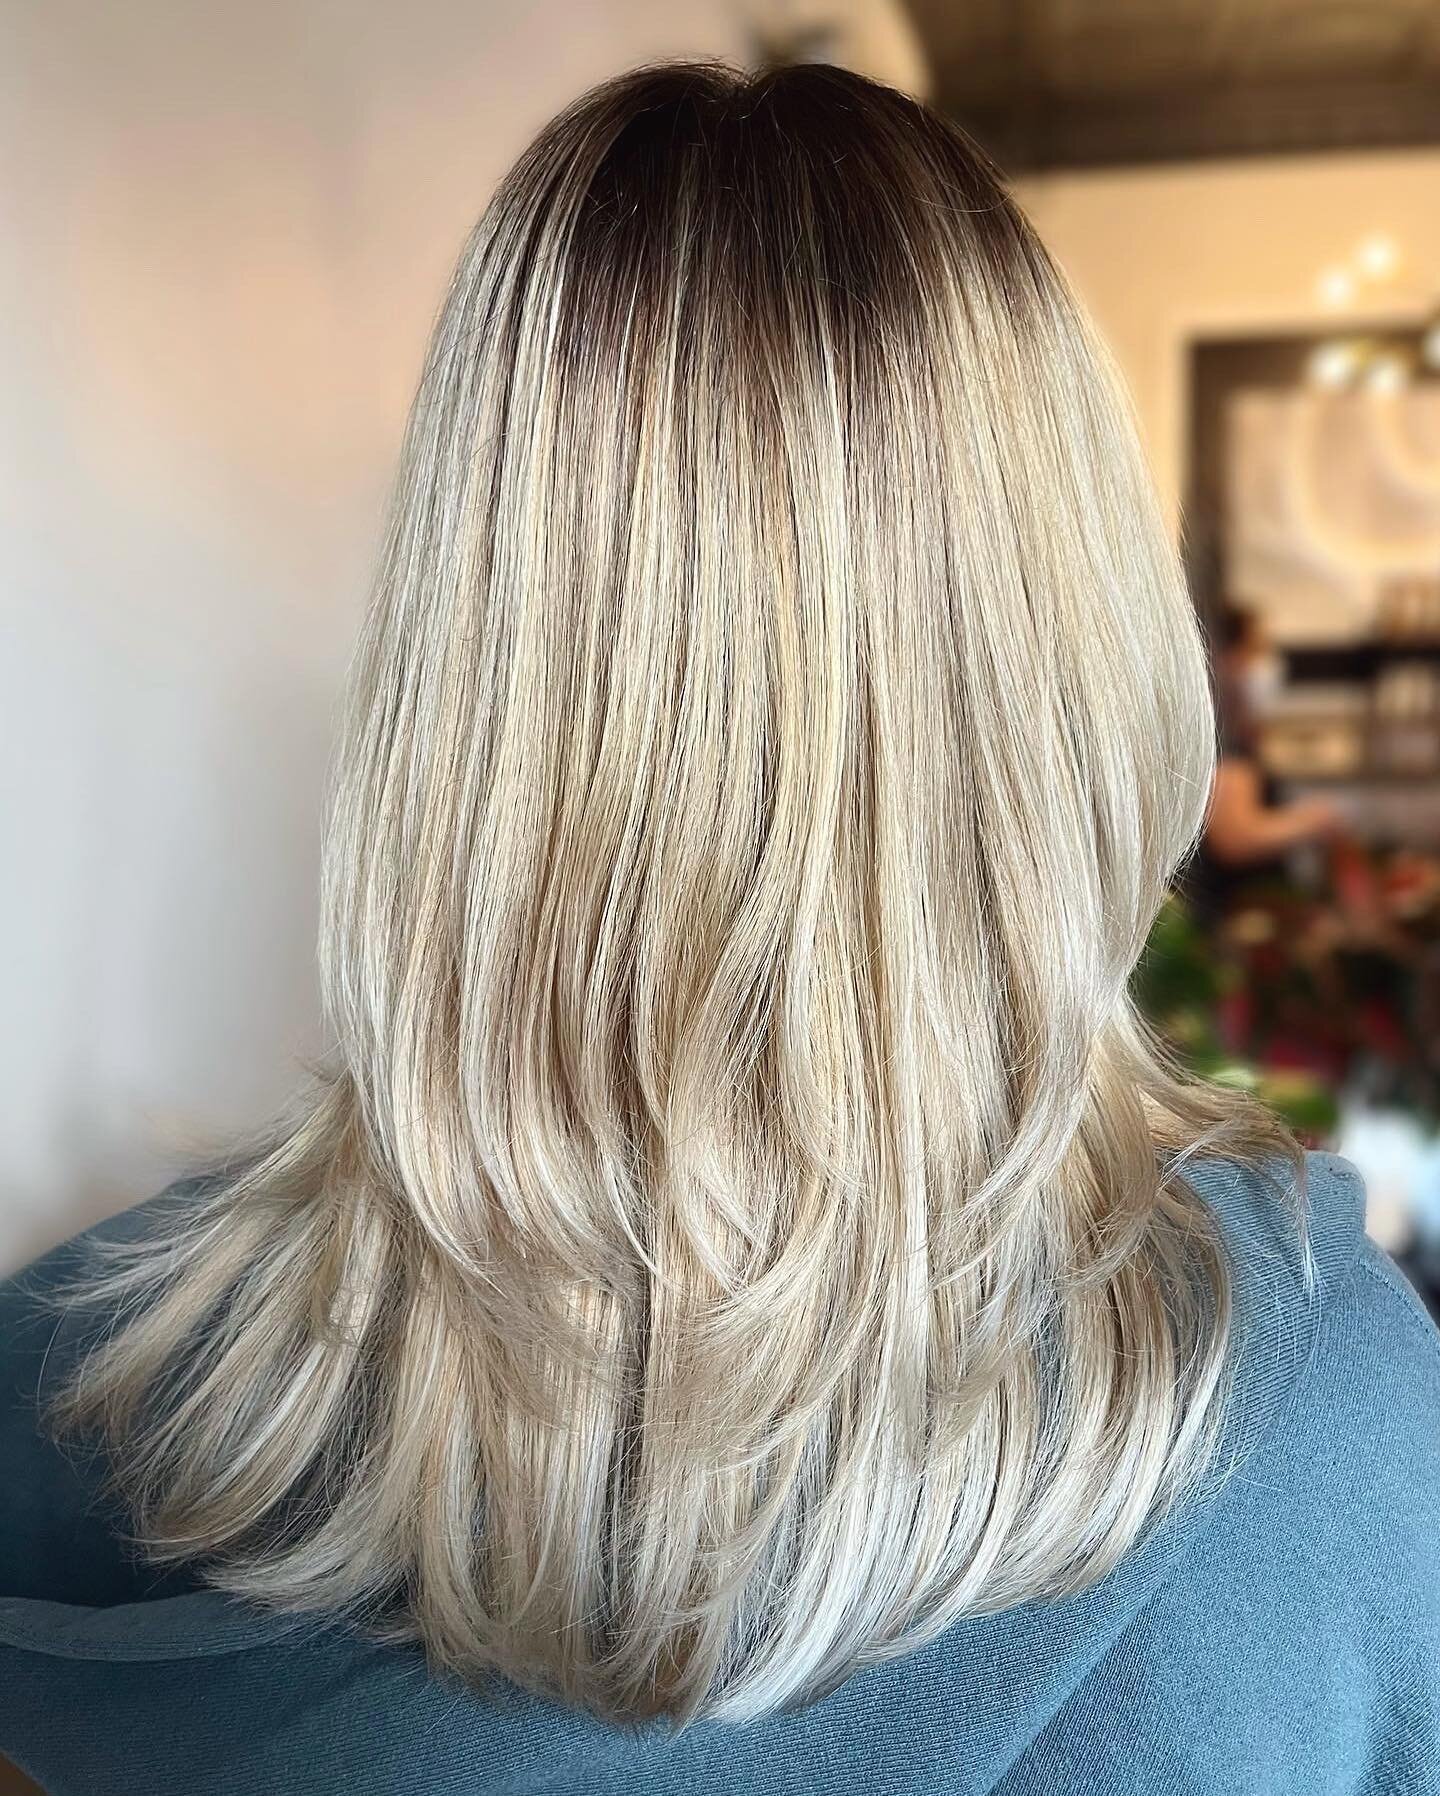 🌟CORRECTIVE BLONDING🌟This beautiful, bright dimensional blonde for Madeline is sure to turn heads! Swipe to see the before of the previous color she came in with. 💫

Color correction by Stylist @stranger.bangs using @goldwellus